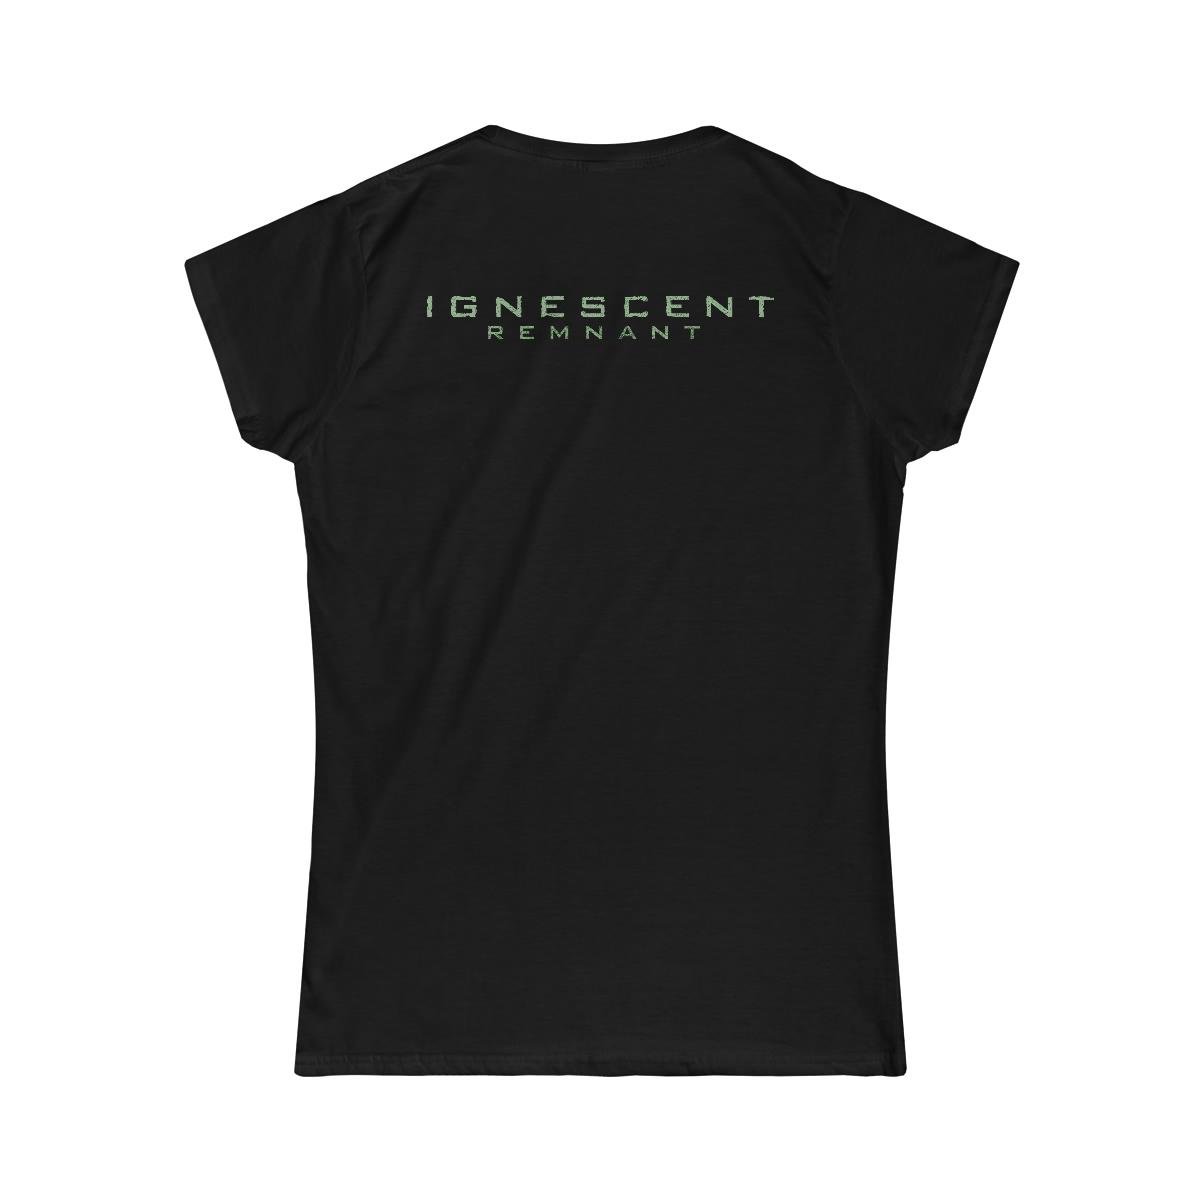 Ignescent – Remnant Women’s Short Sleeve Tshirt (2 Sided)